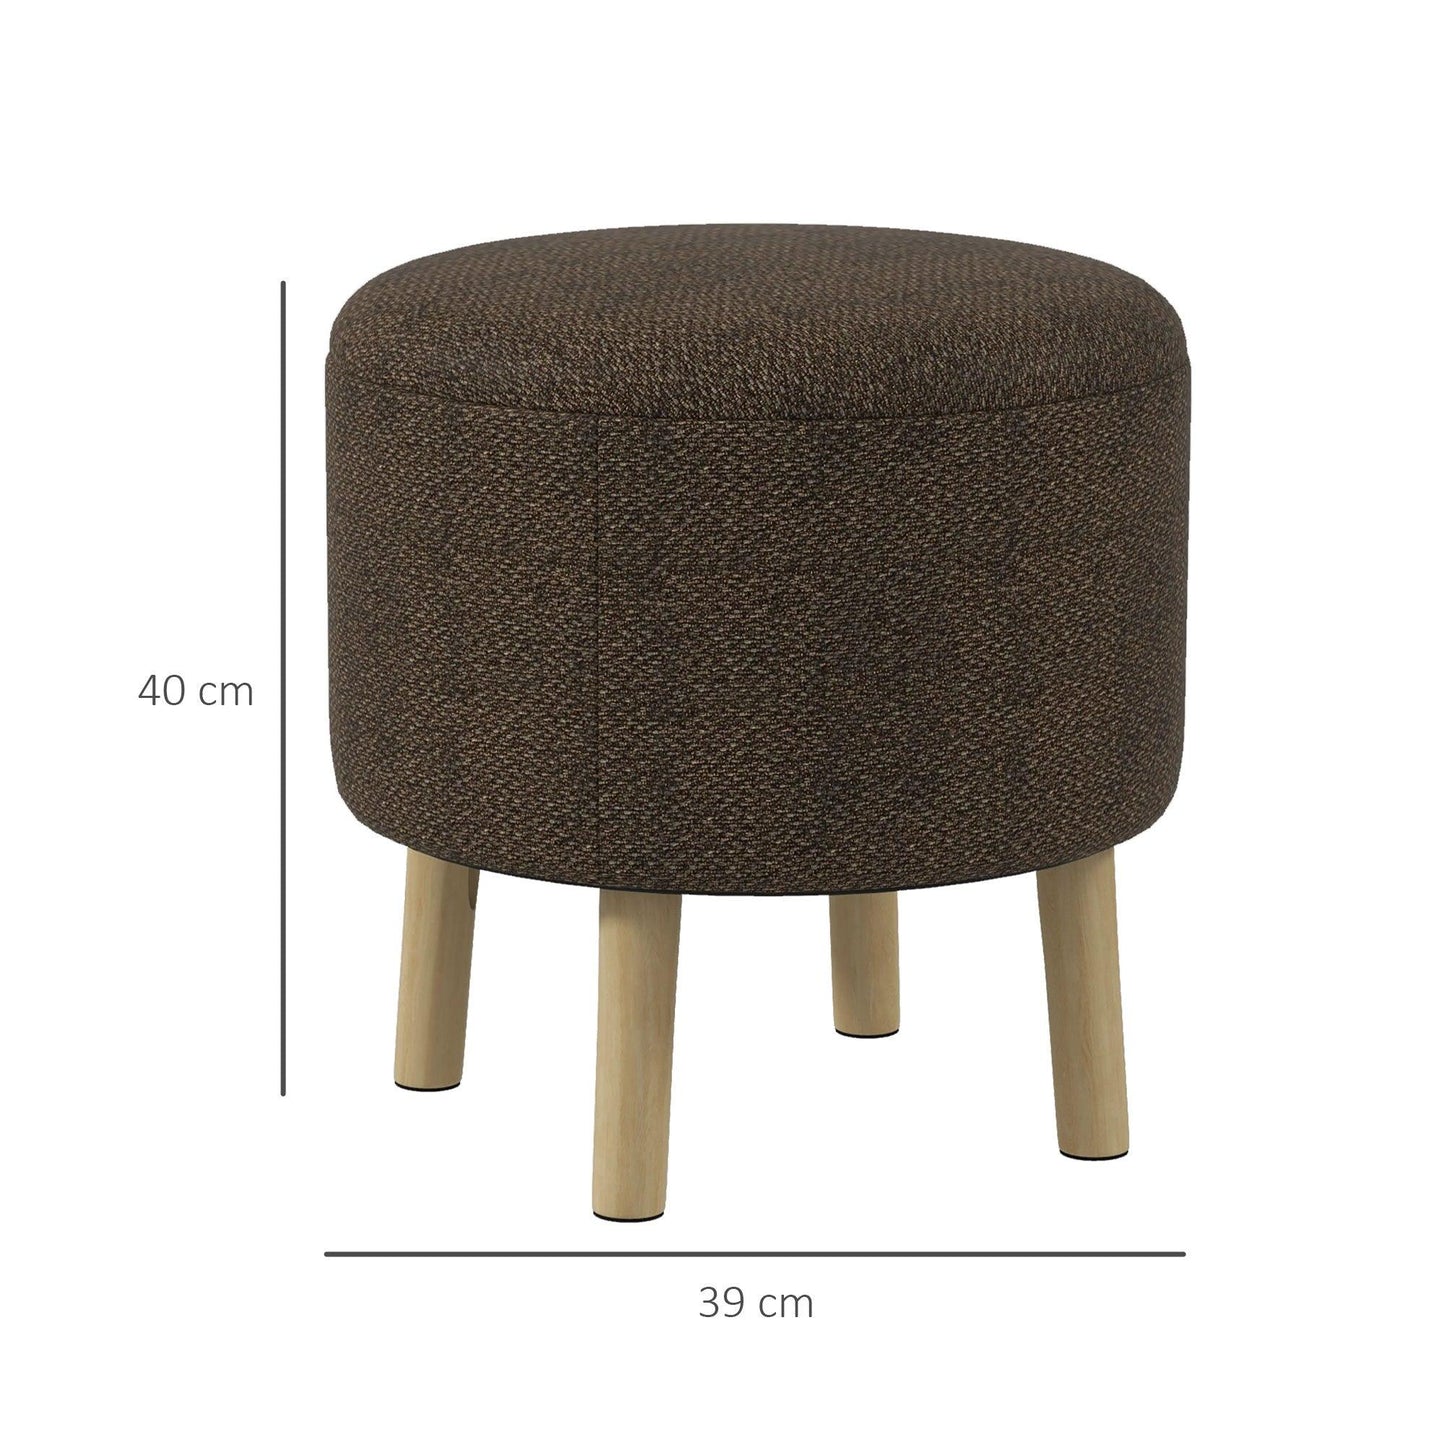 HOMCOM Round Ottoman Stool with Storage, Linen Fabric Upholstered Foot Stool with Padded Seat, Hidden Space and Wood Legs - ALL4U RETAILER LTD